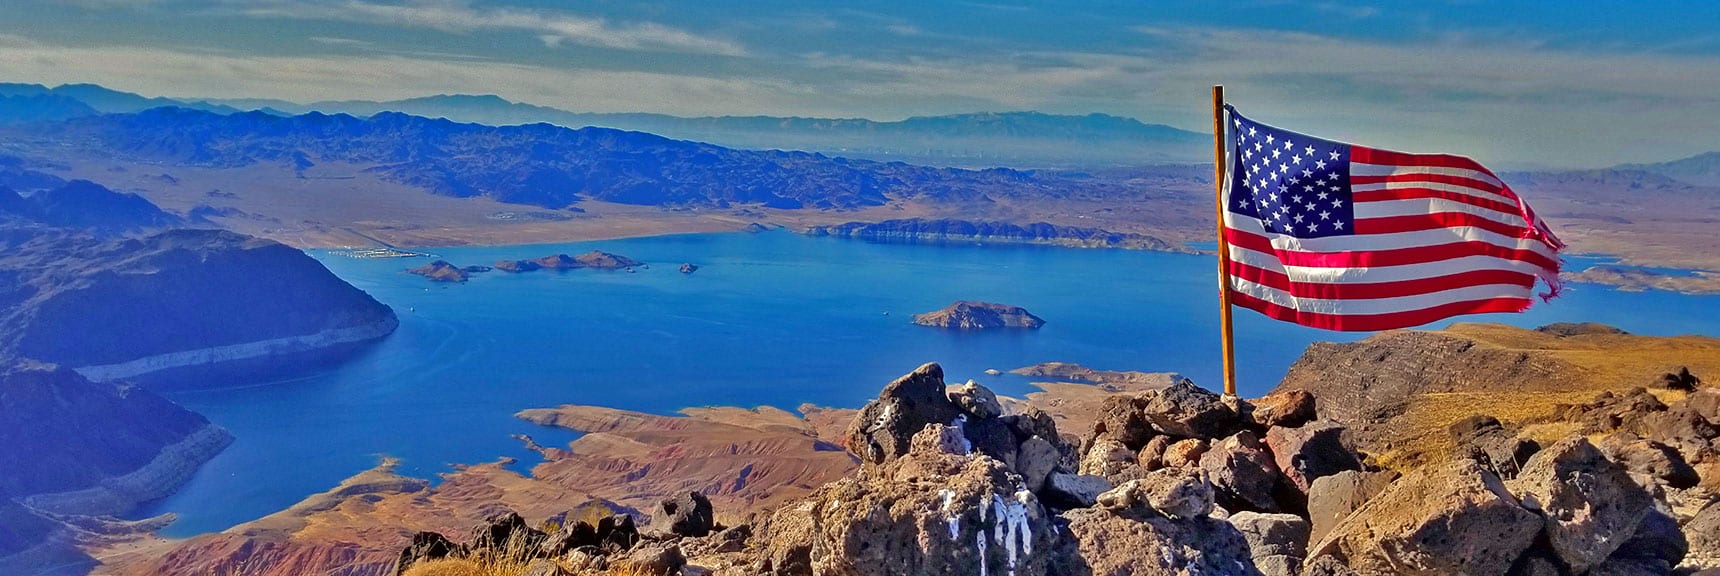 Fortification Hill |Lake Mead National Recreation Area, Nevada